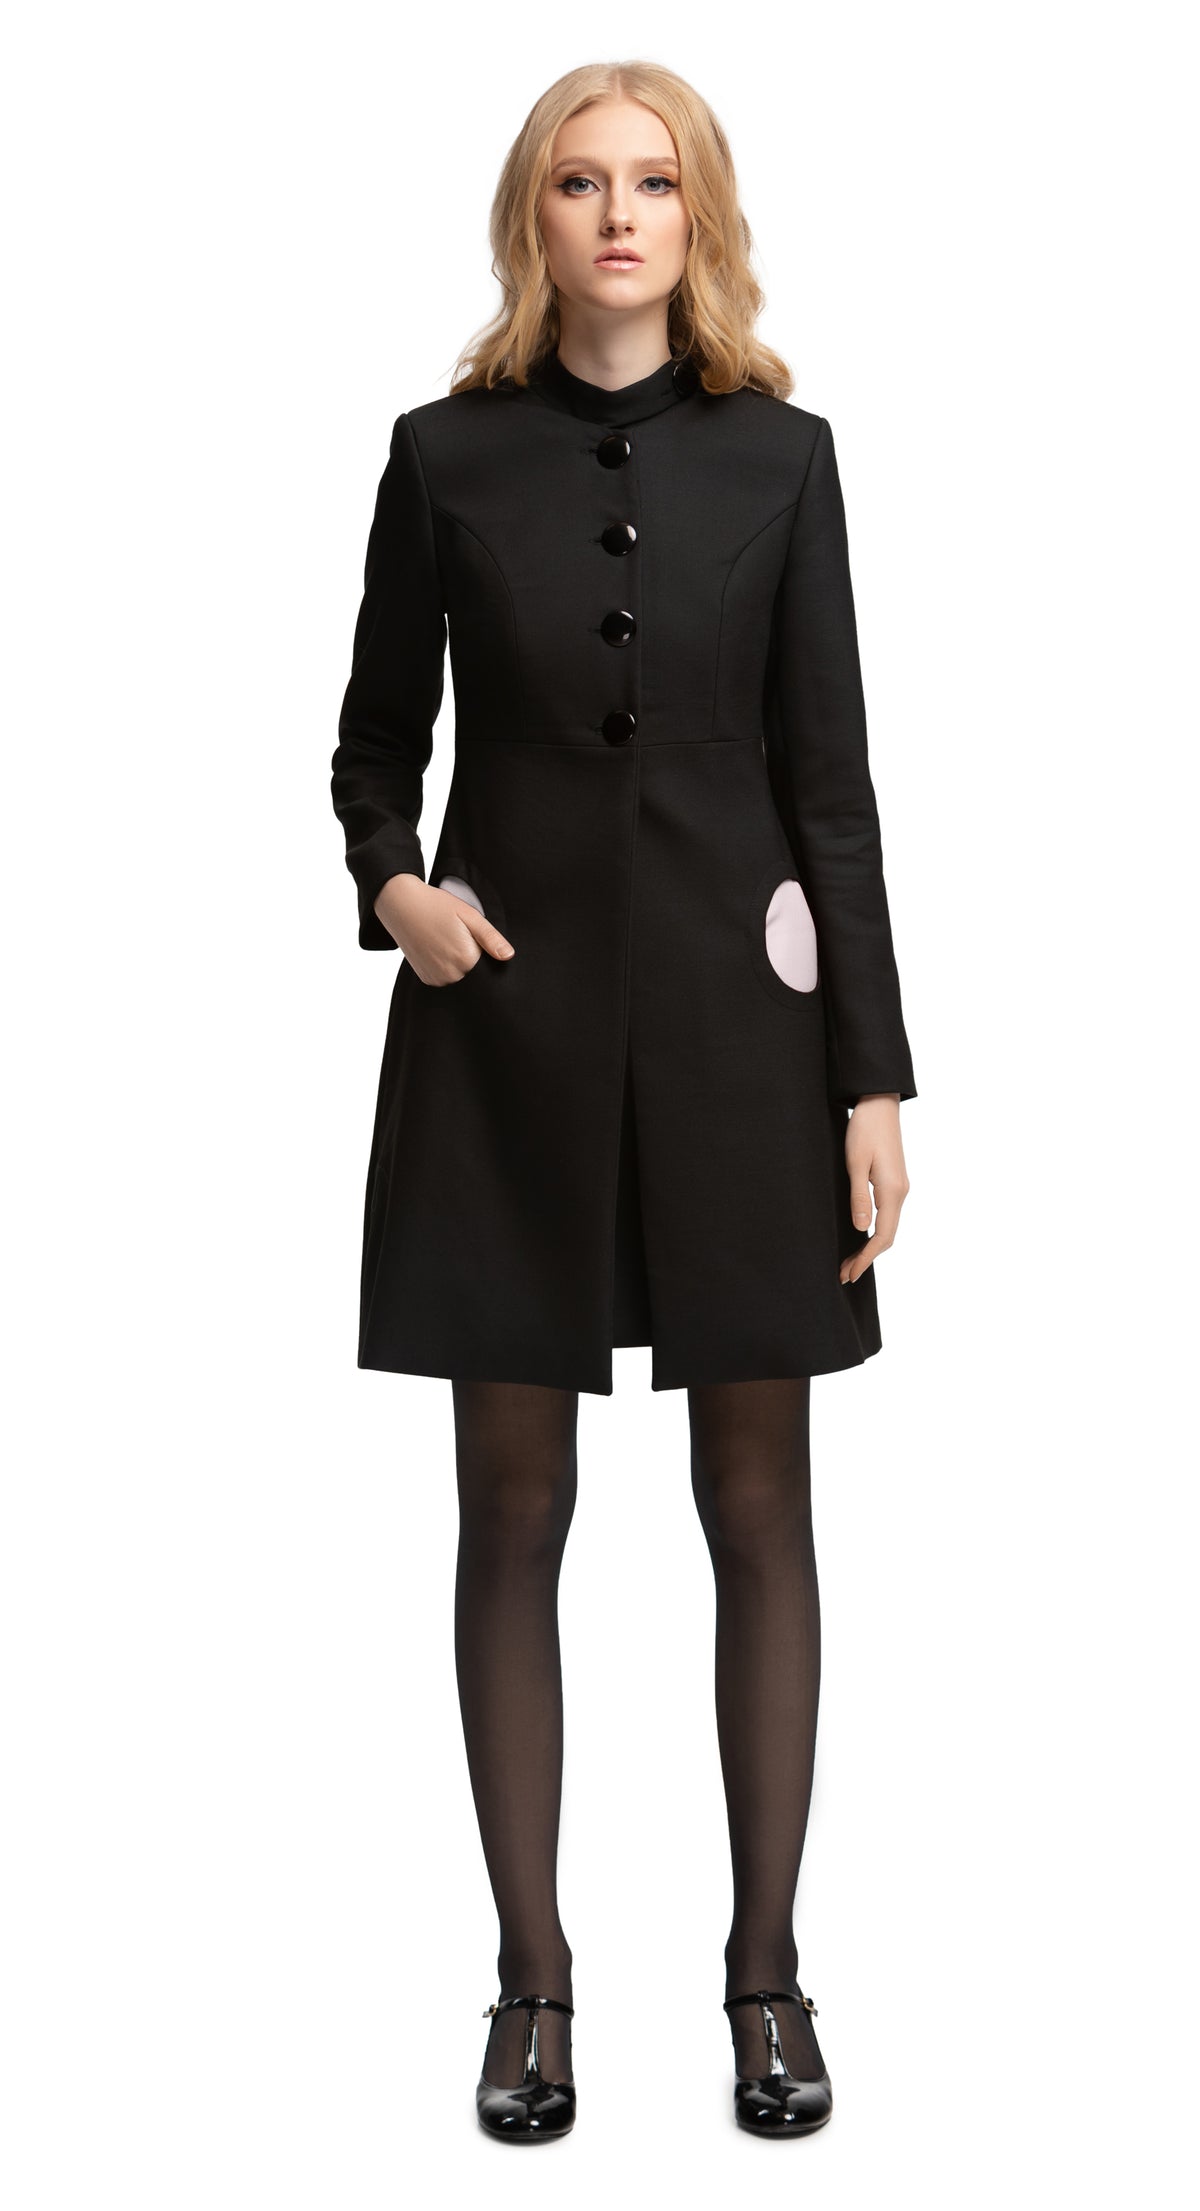 MARMALADE Black Classic Style Coat with Red Circle Pockets